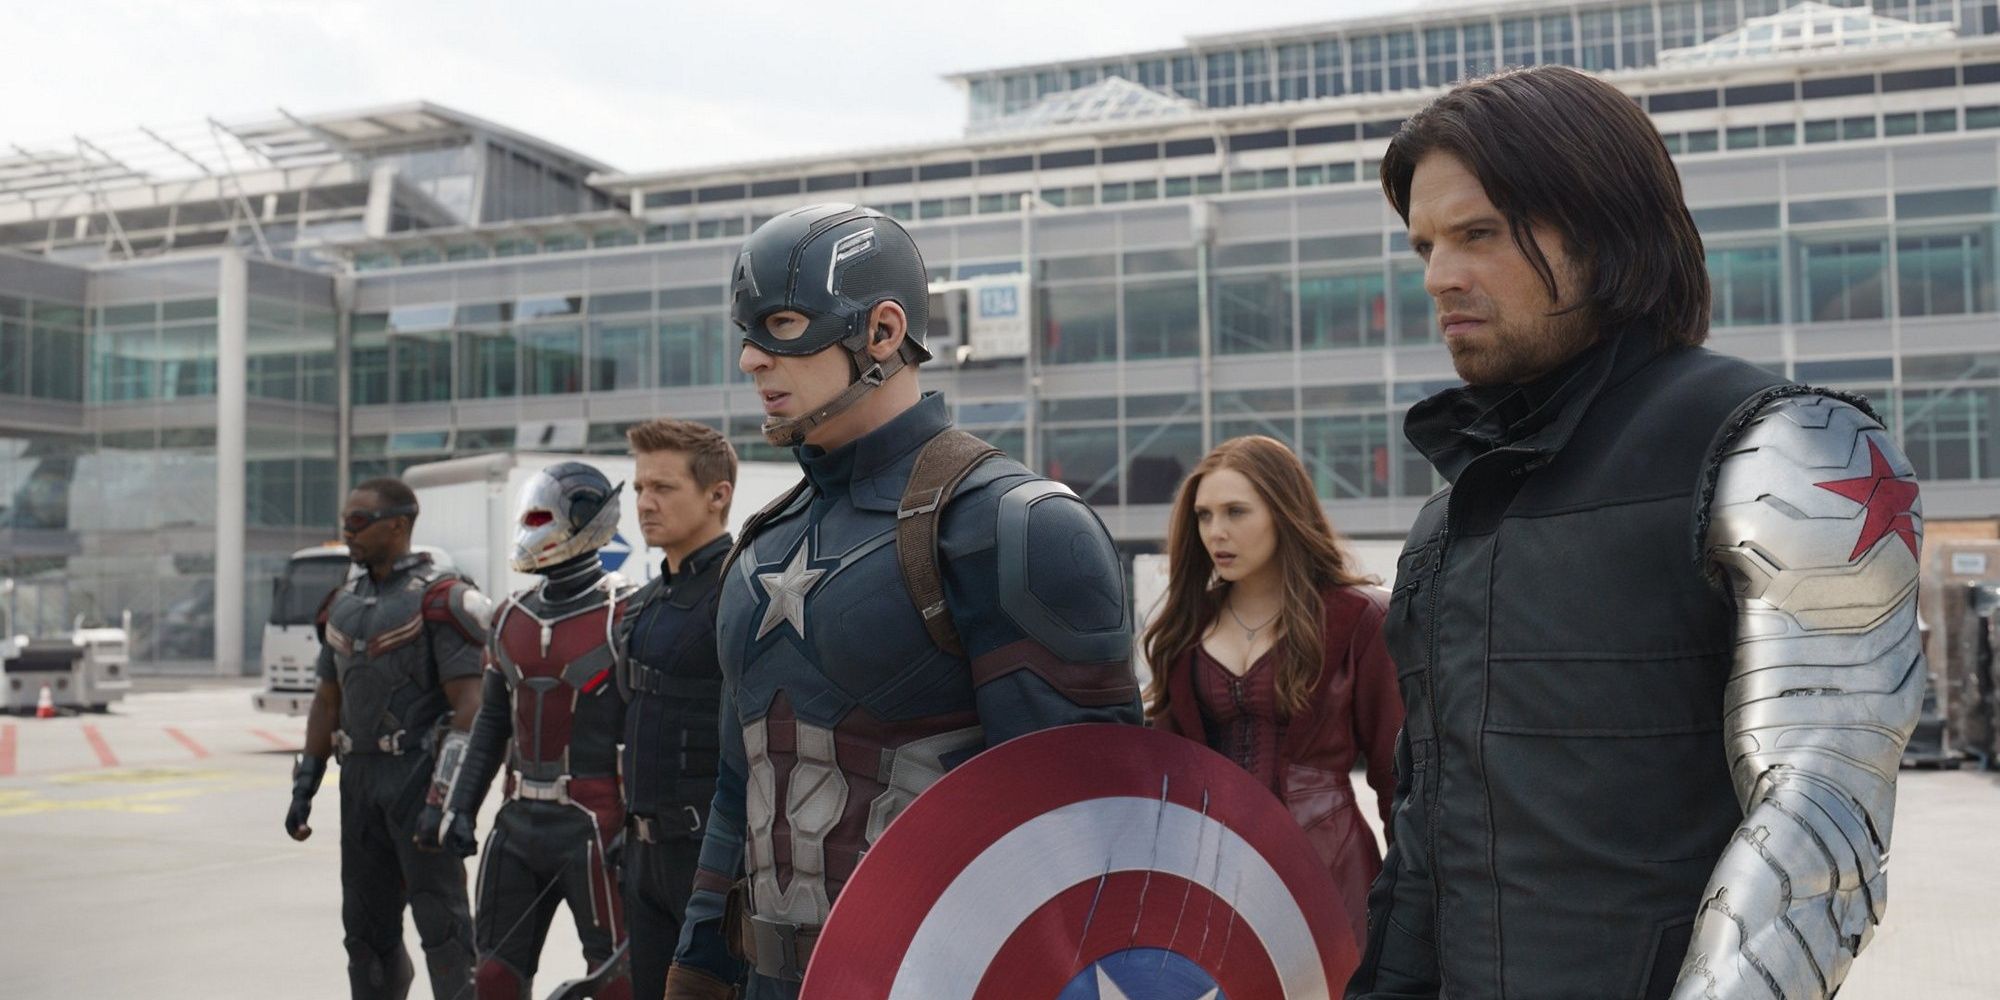 Team Cap comprend Falcon, Ant-Man, Hawkeye, Captain America, Scarlet Witch et Winter Soldier